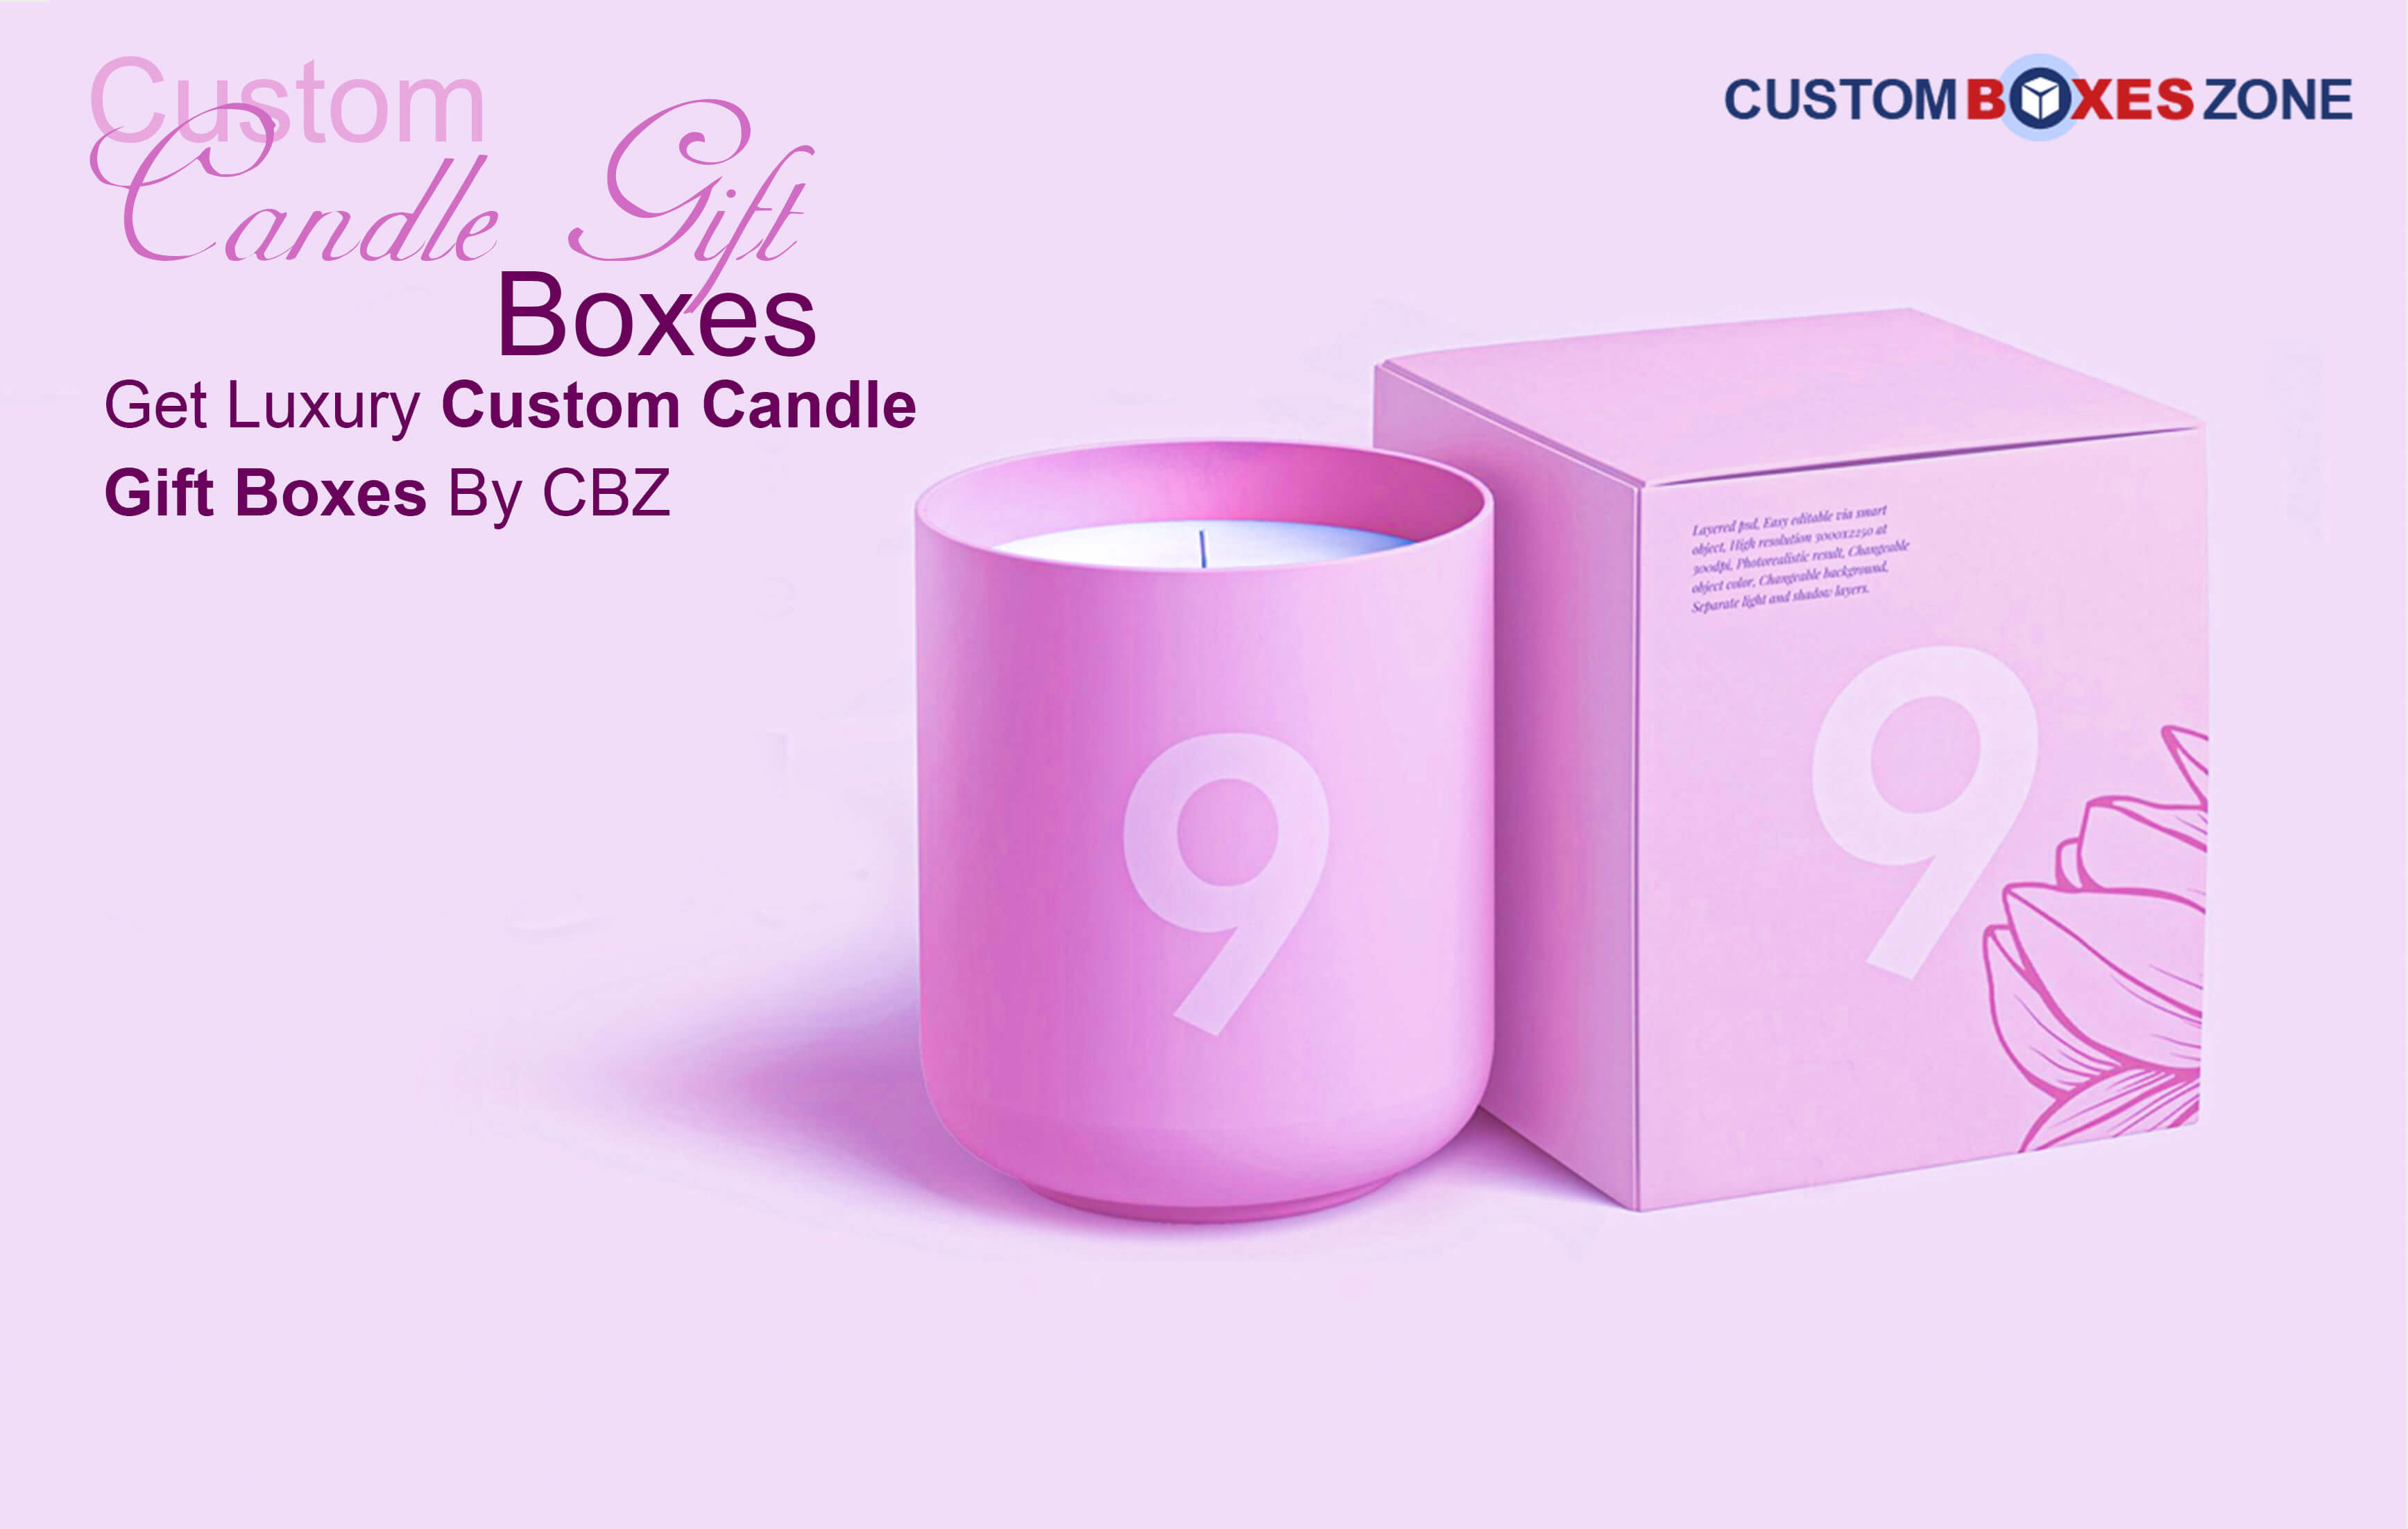 Get Luxury Custom Candle T Boxes By Custom Boxes Zone 6667